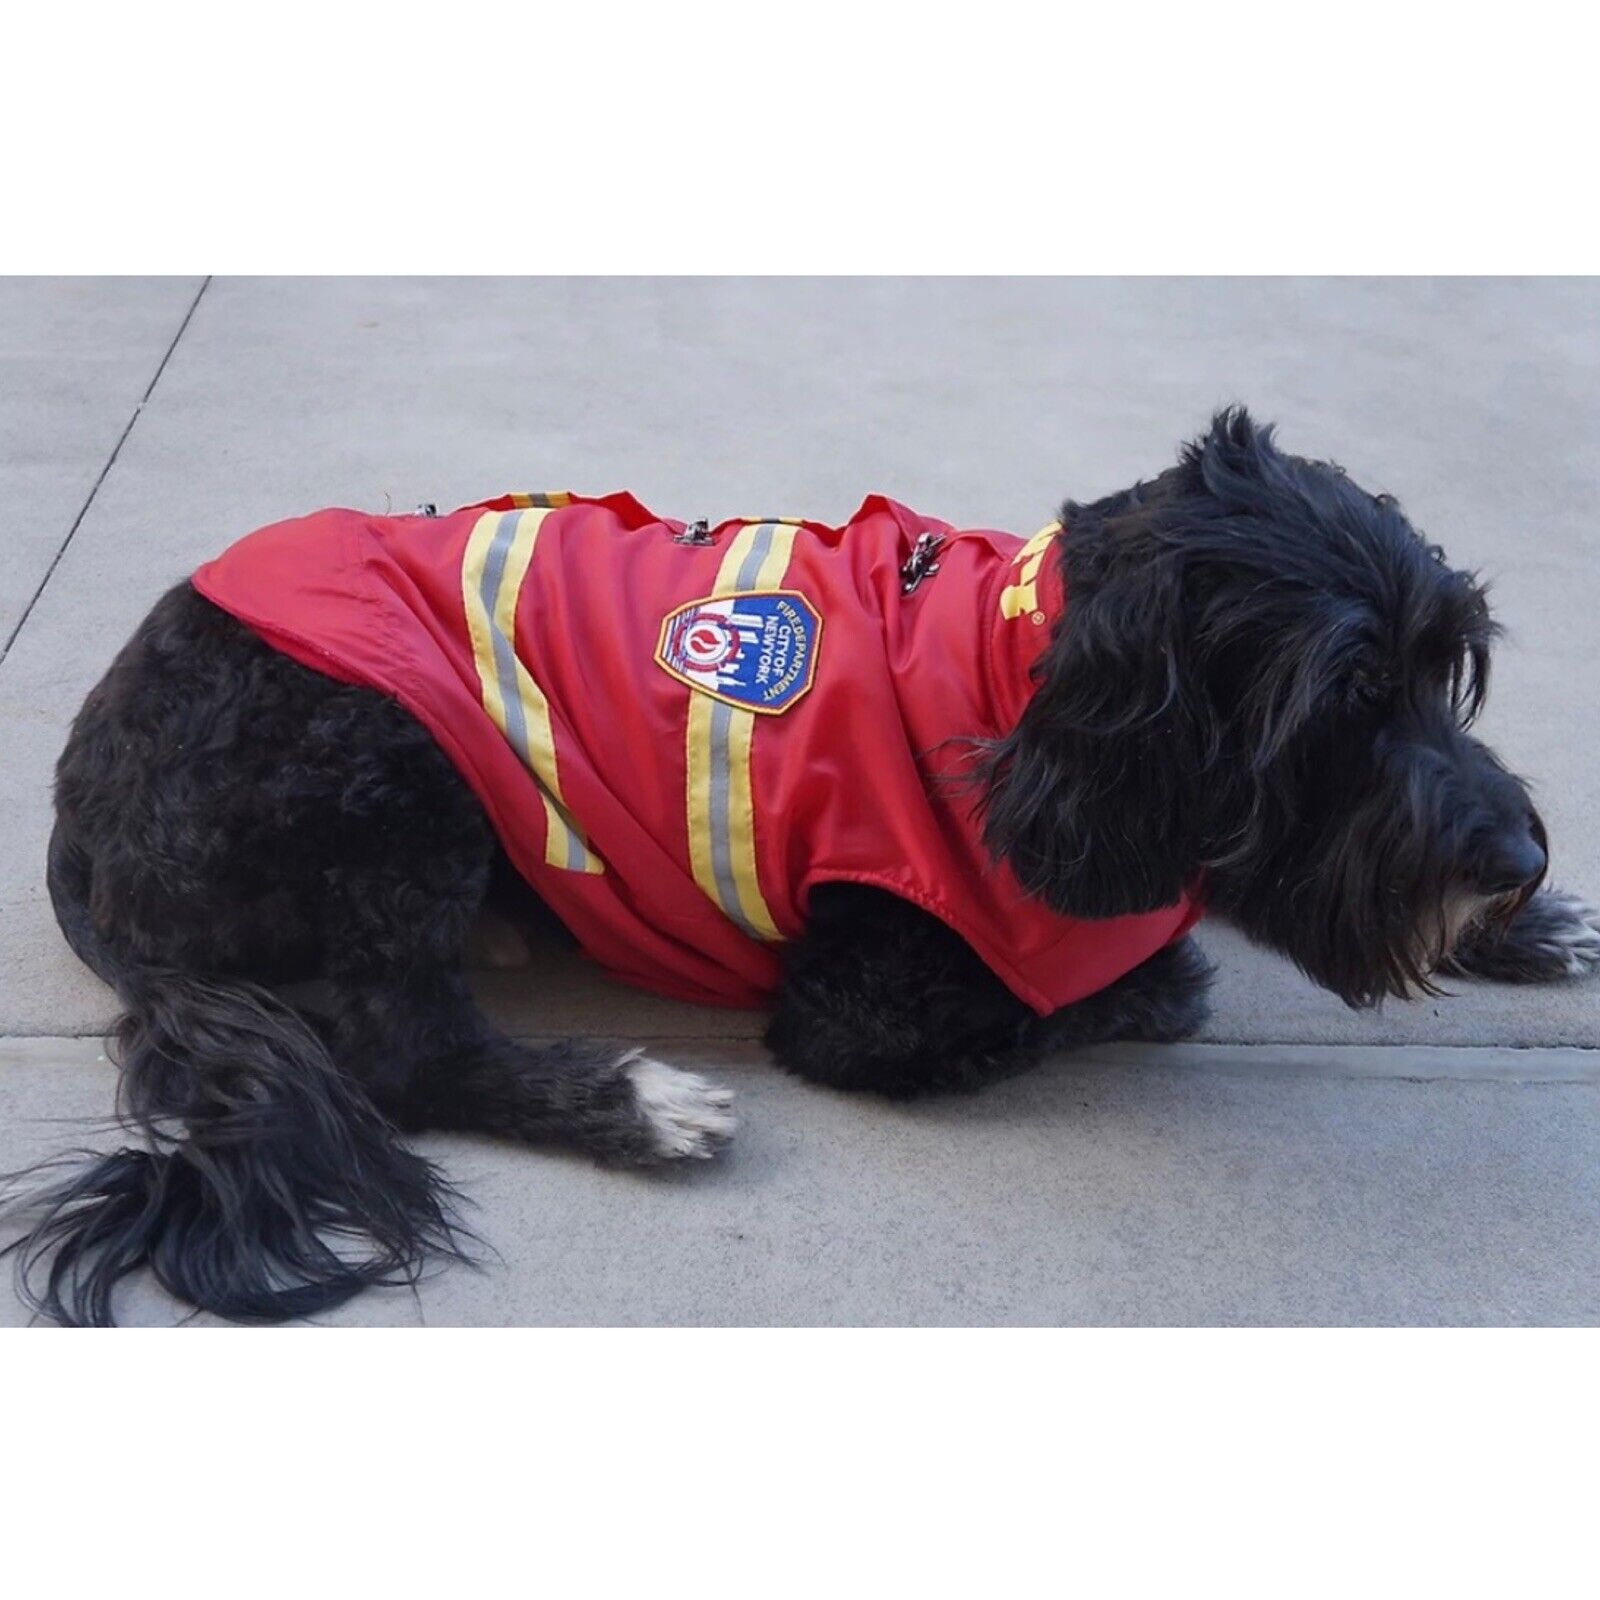 NEW FDNY Red Dog Jacket Fire Fighter Bunker Coat Jacket NEW Large